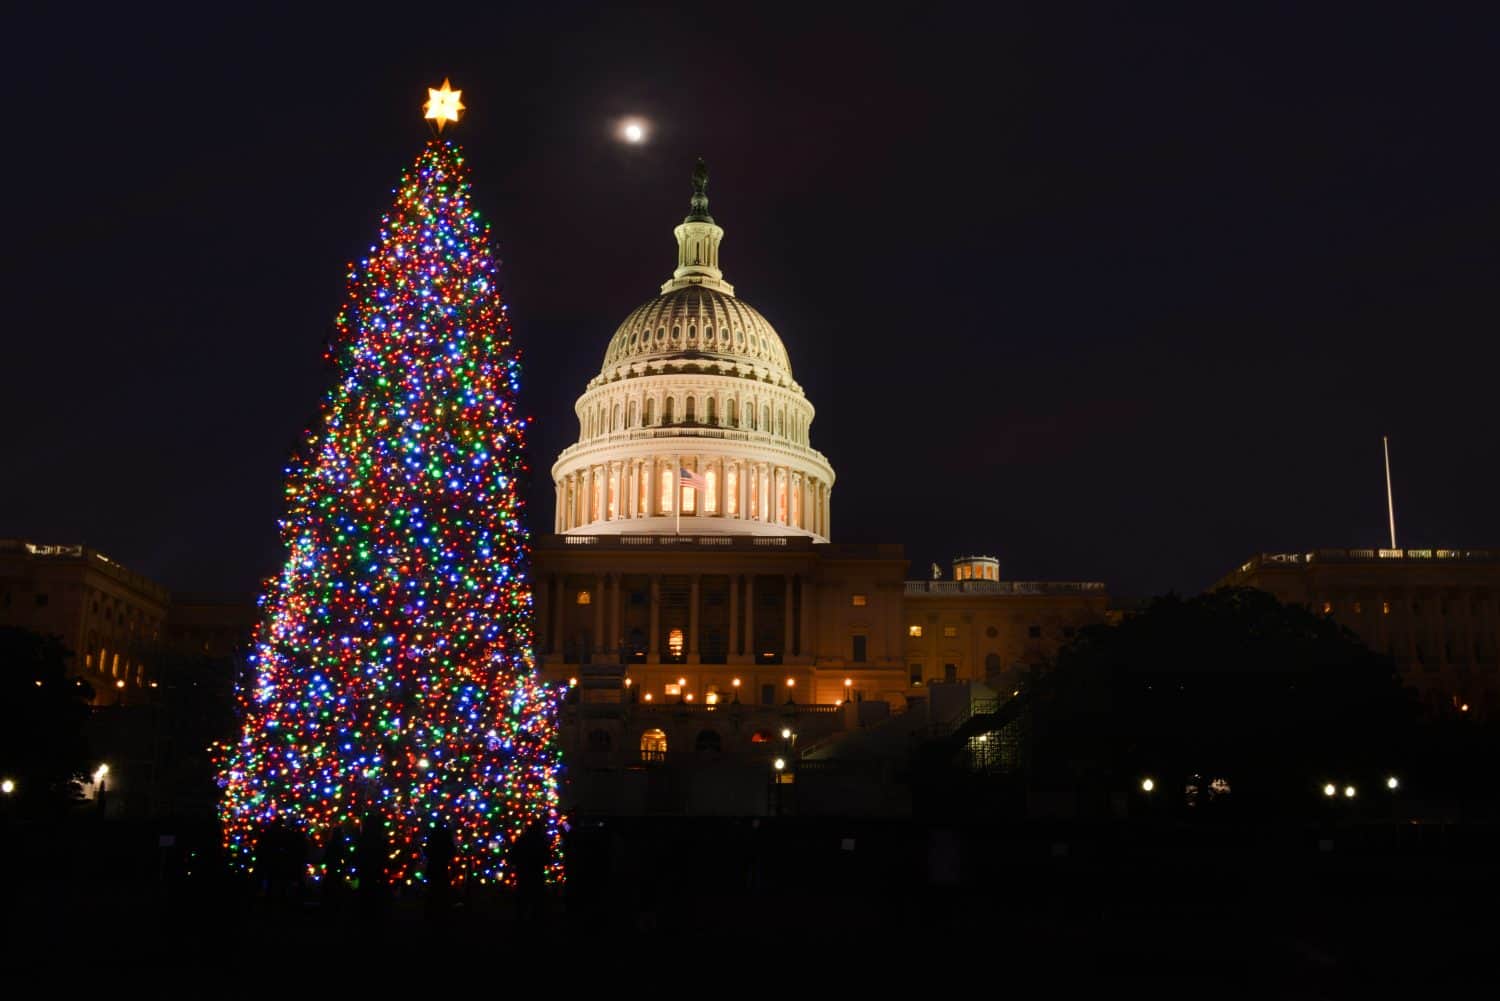 US Capitol building and the Christmas tree at night - Washington DC, United States